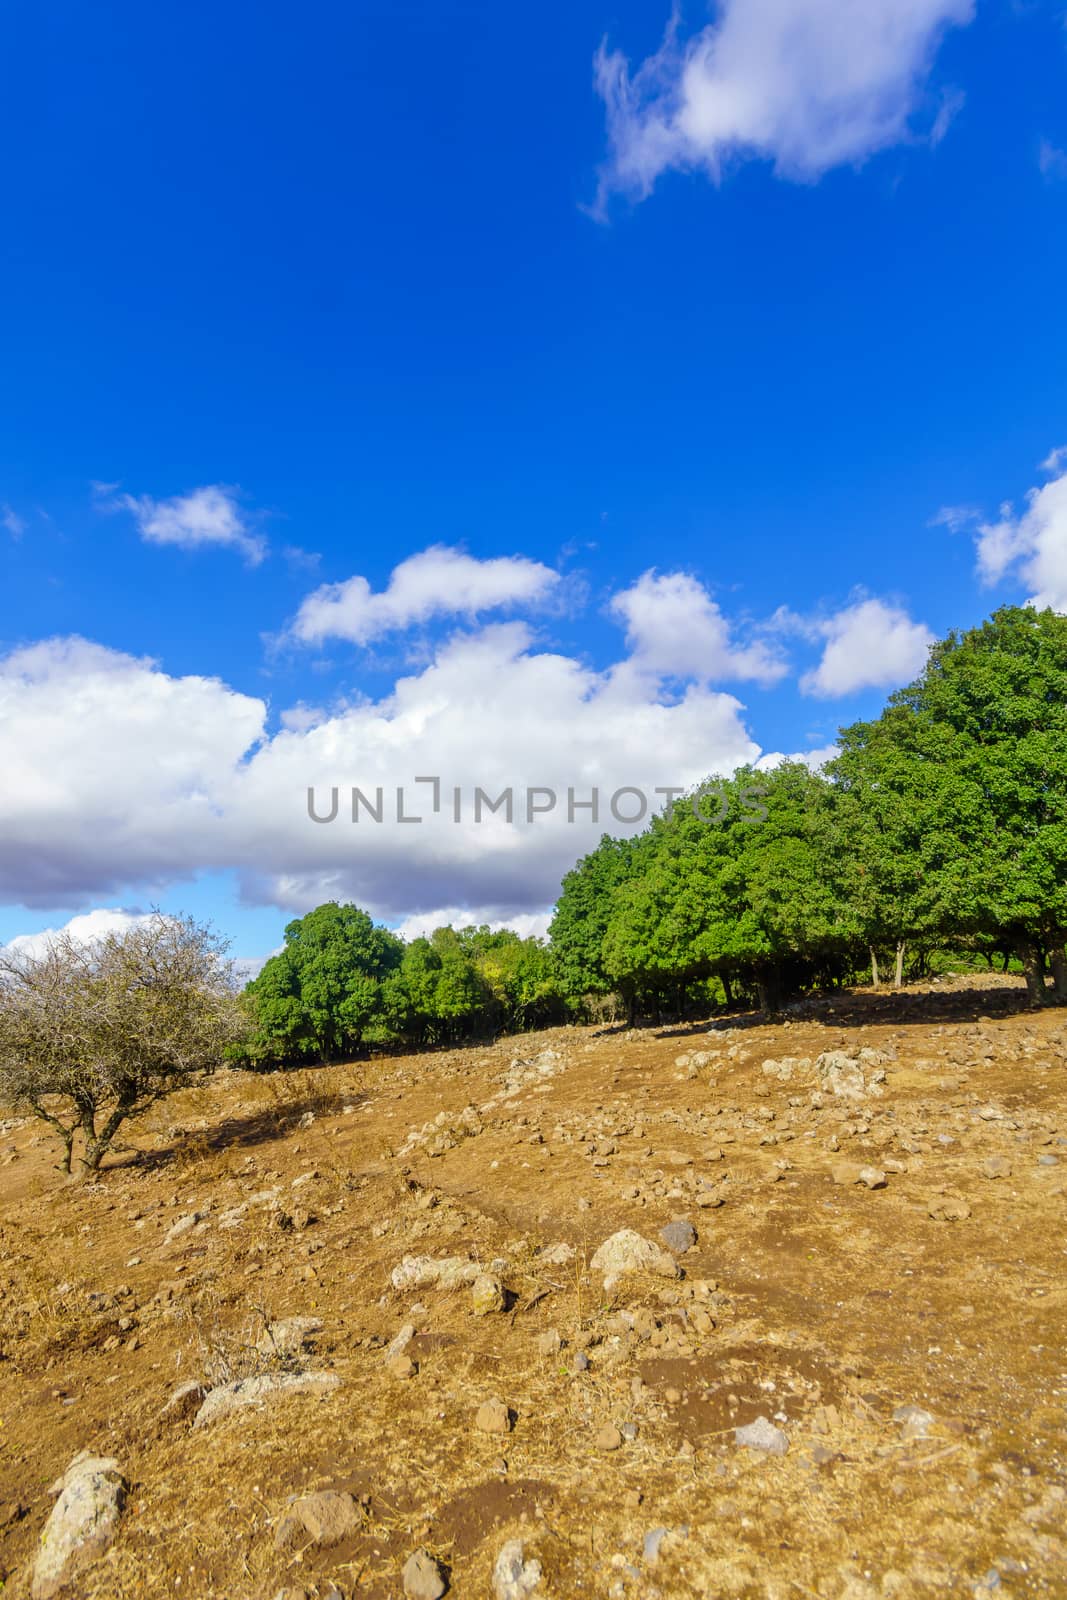 Volcanic landscape in the Golan Heights by RnDmS